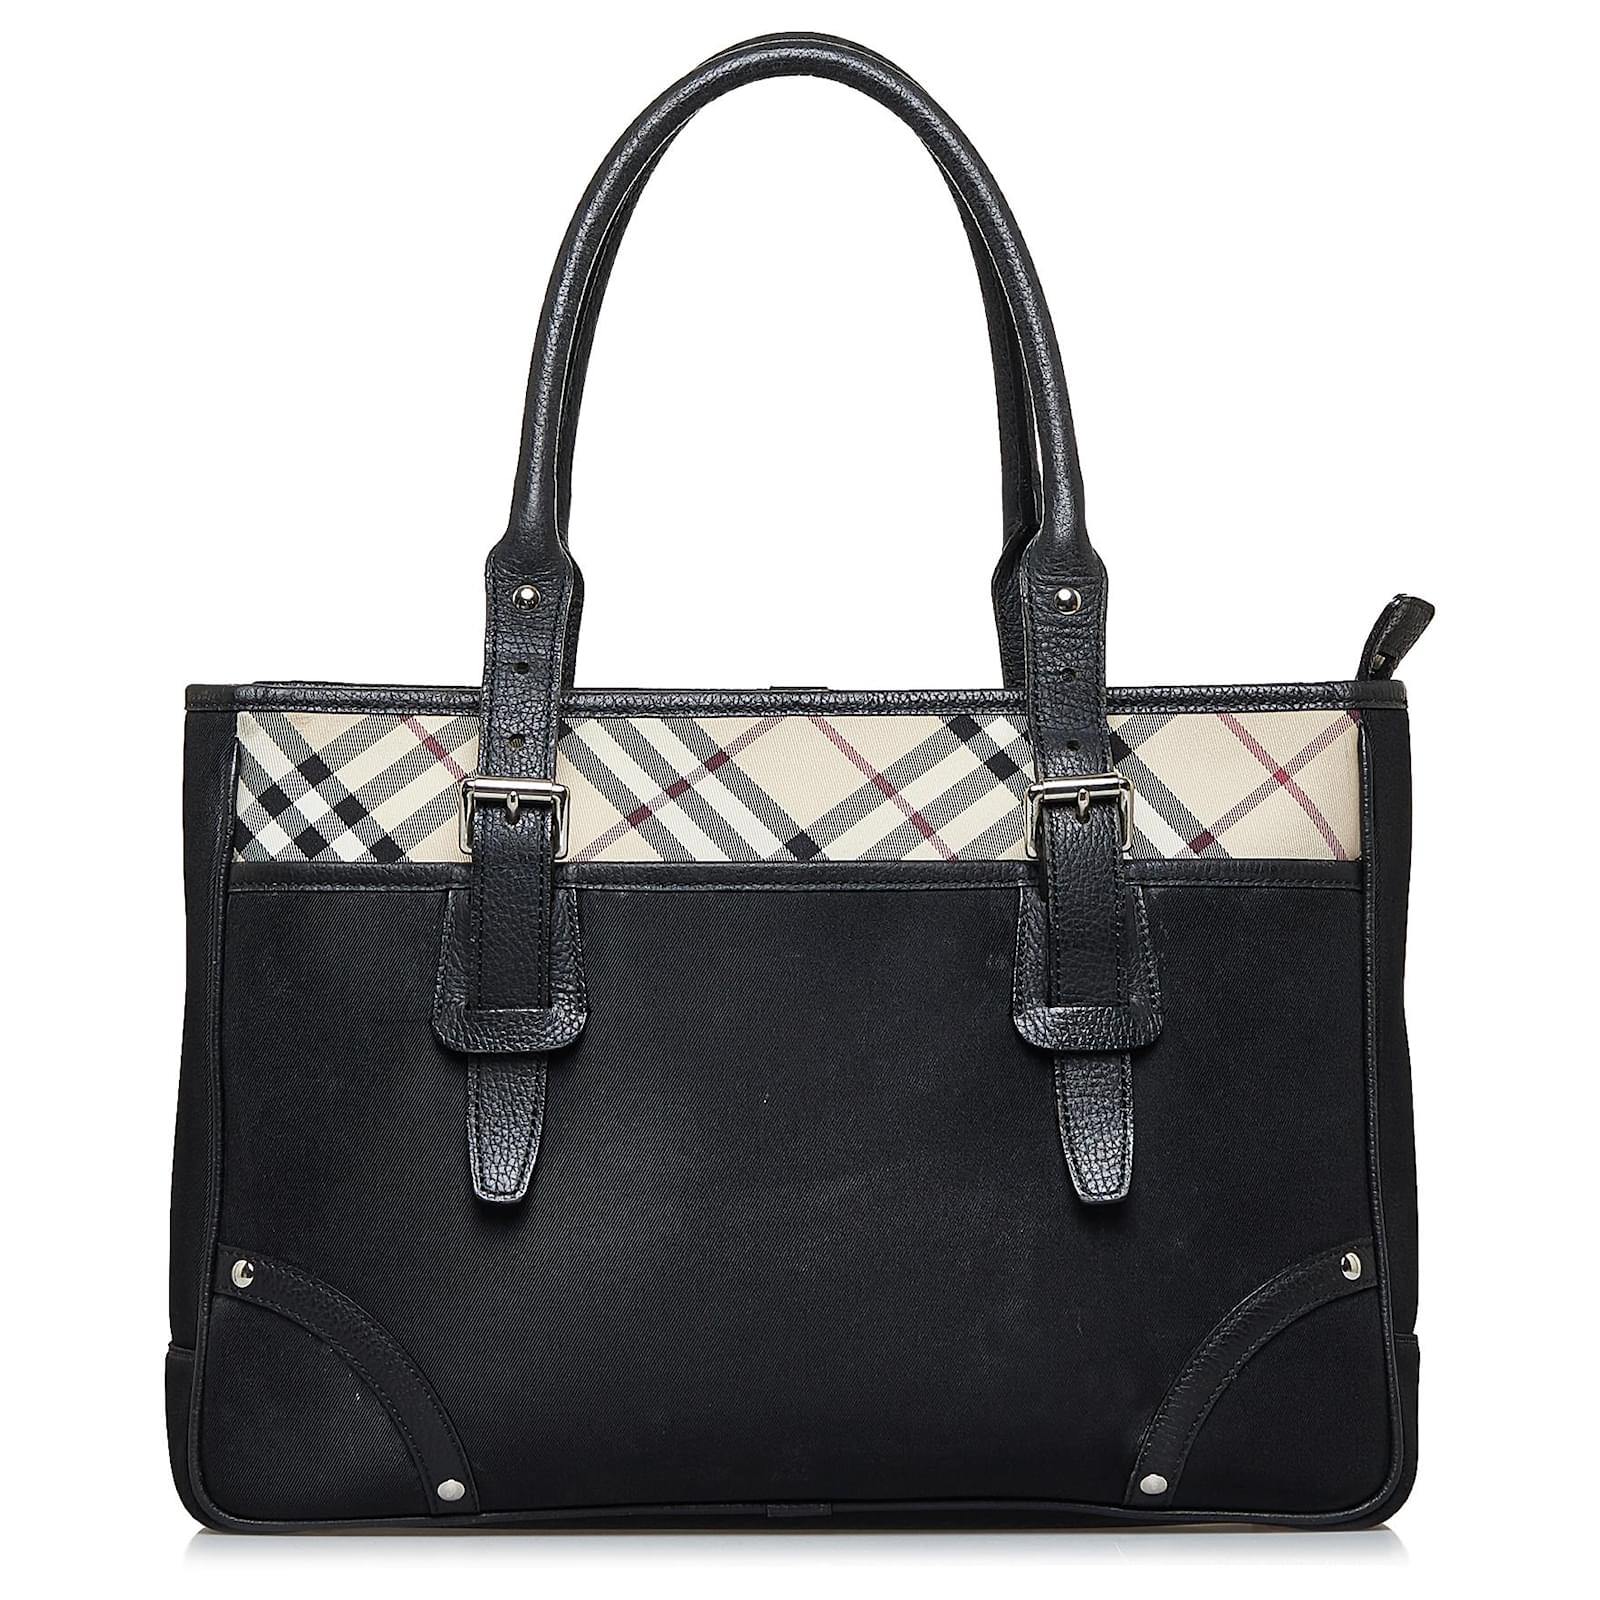 Burberry Black Nylon Leather Buckleigh Tote Bag